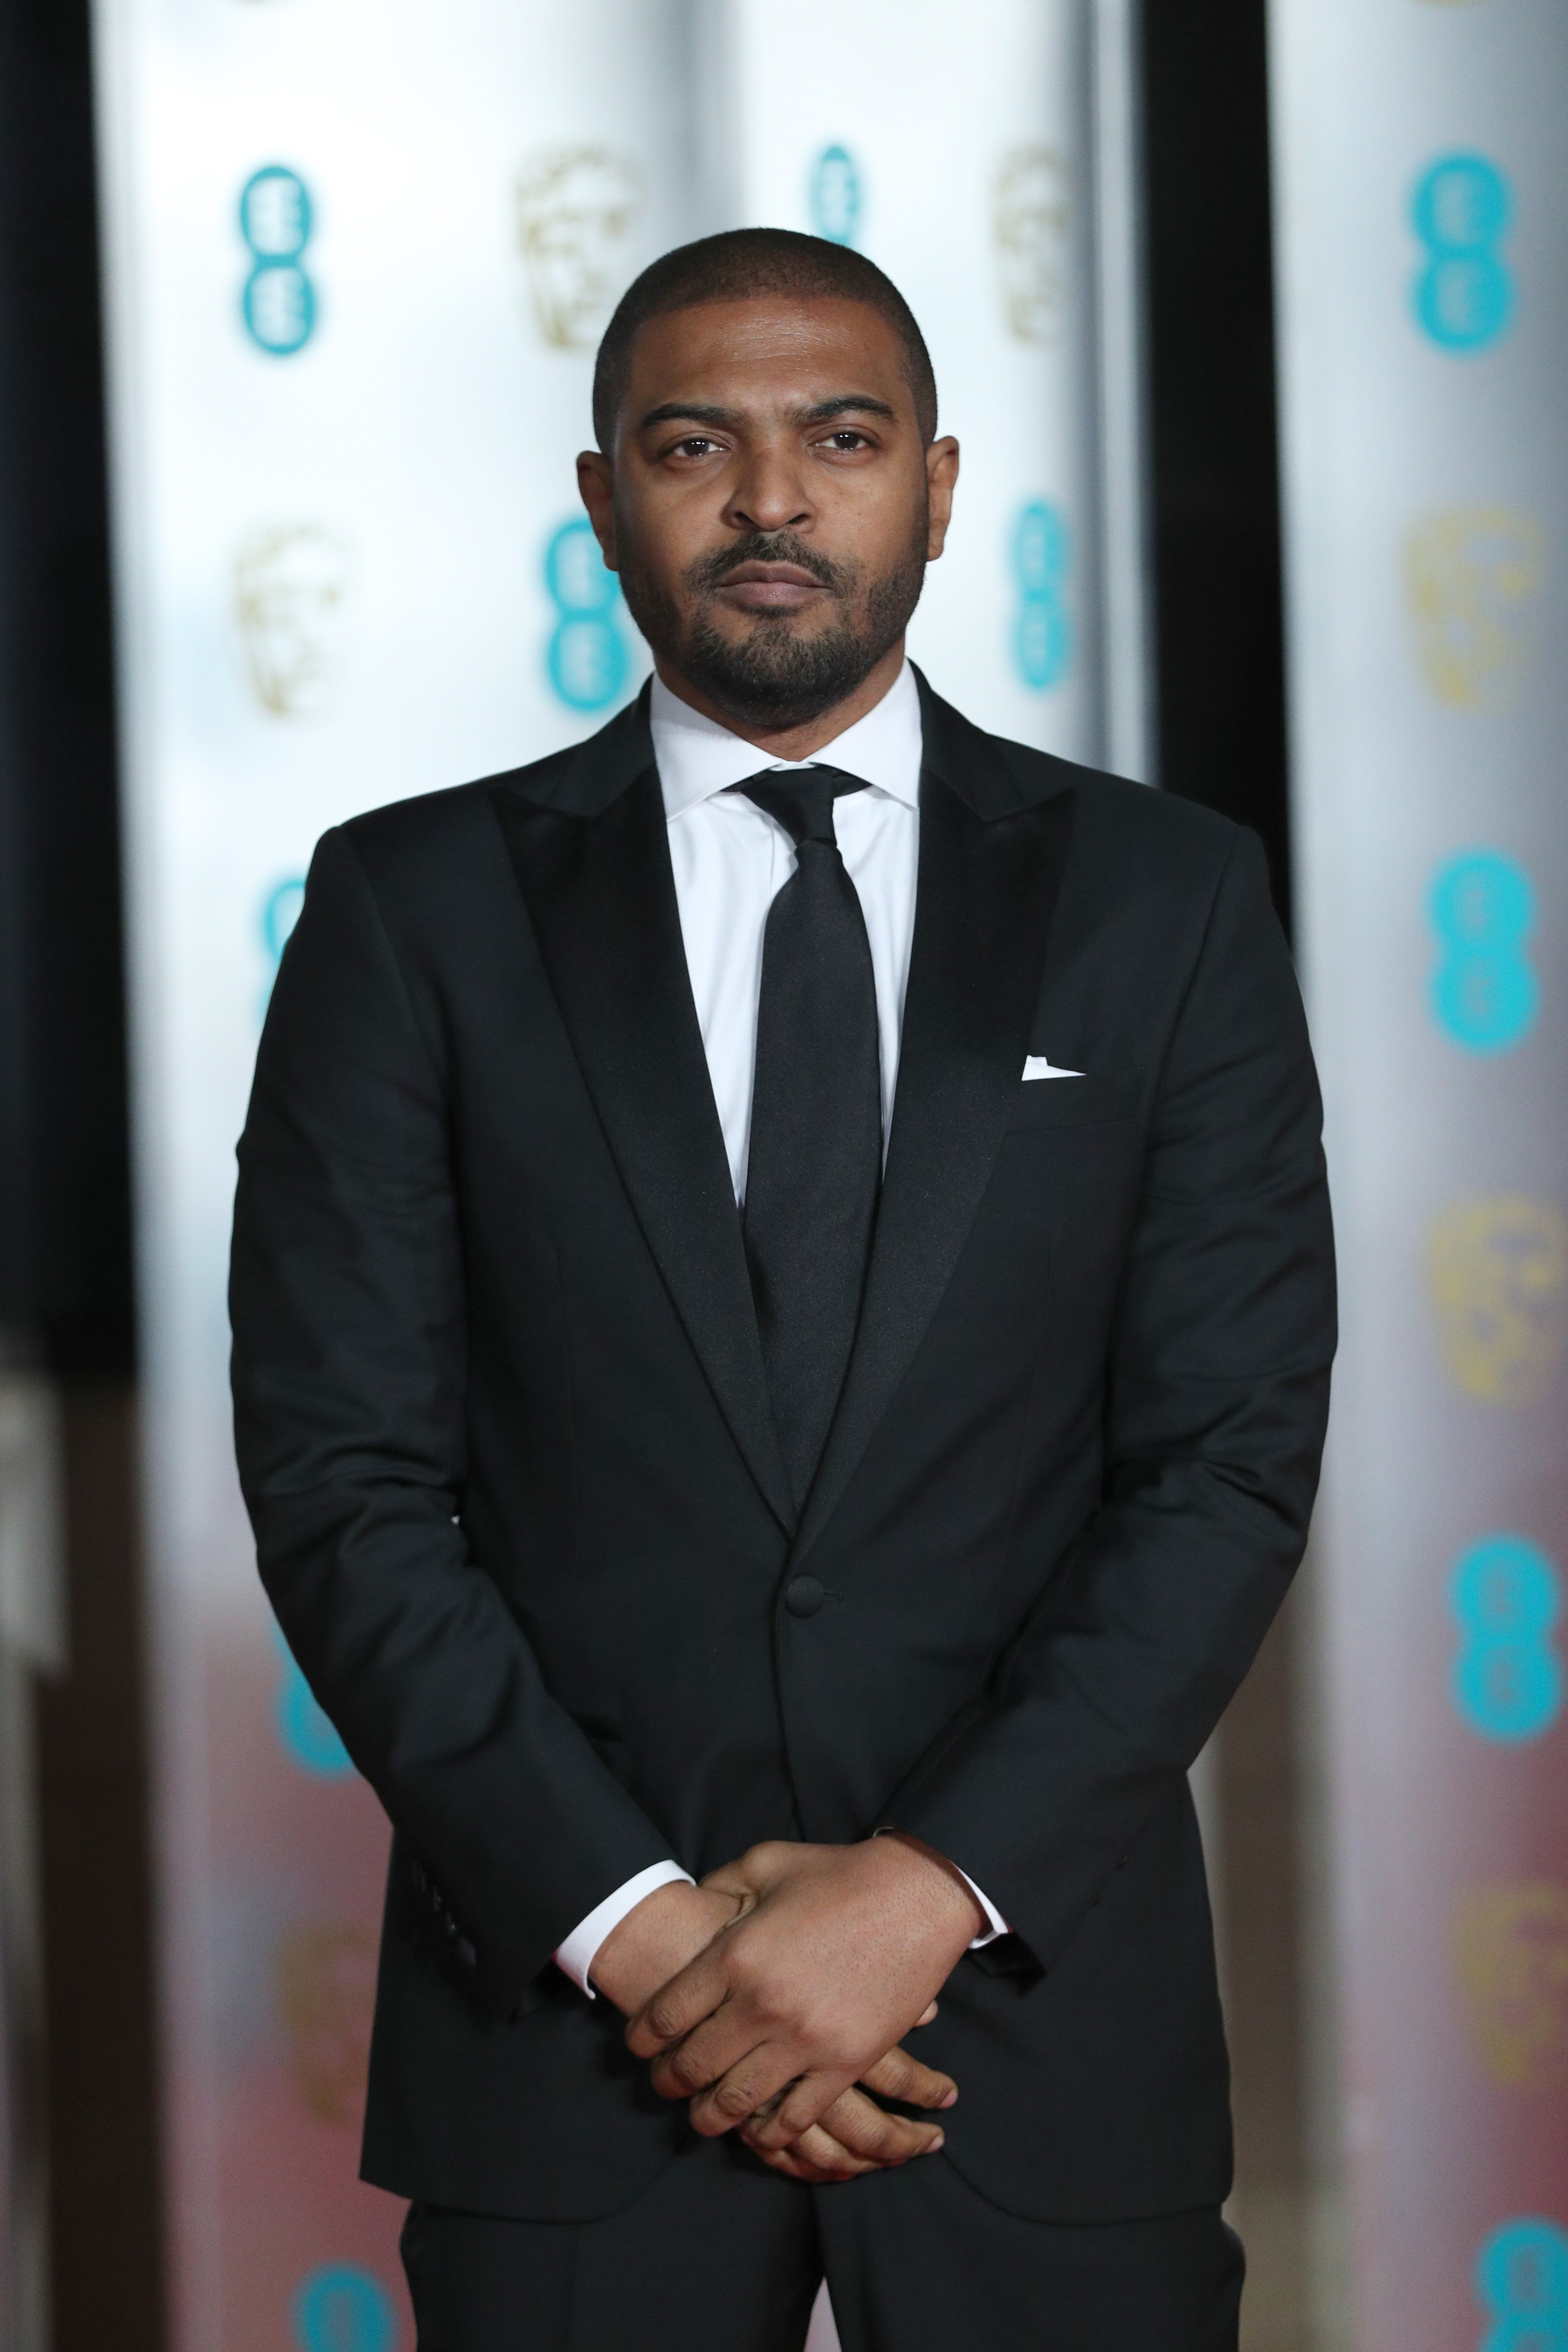 Noel Clarke attending the after show party for the EE British Academy Film Awards at the Grosvenor House Hotel in central London